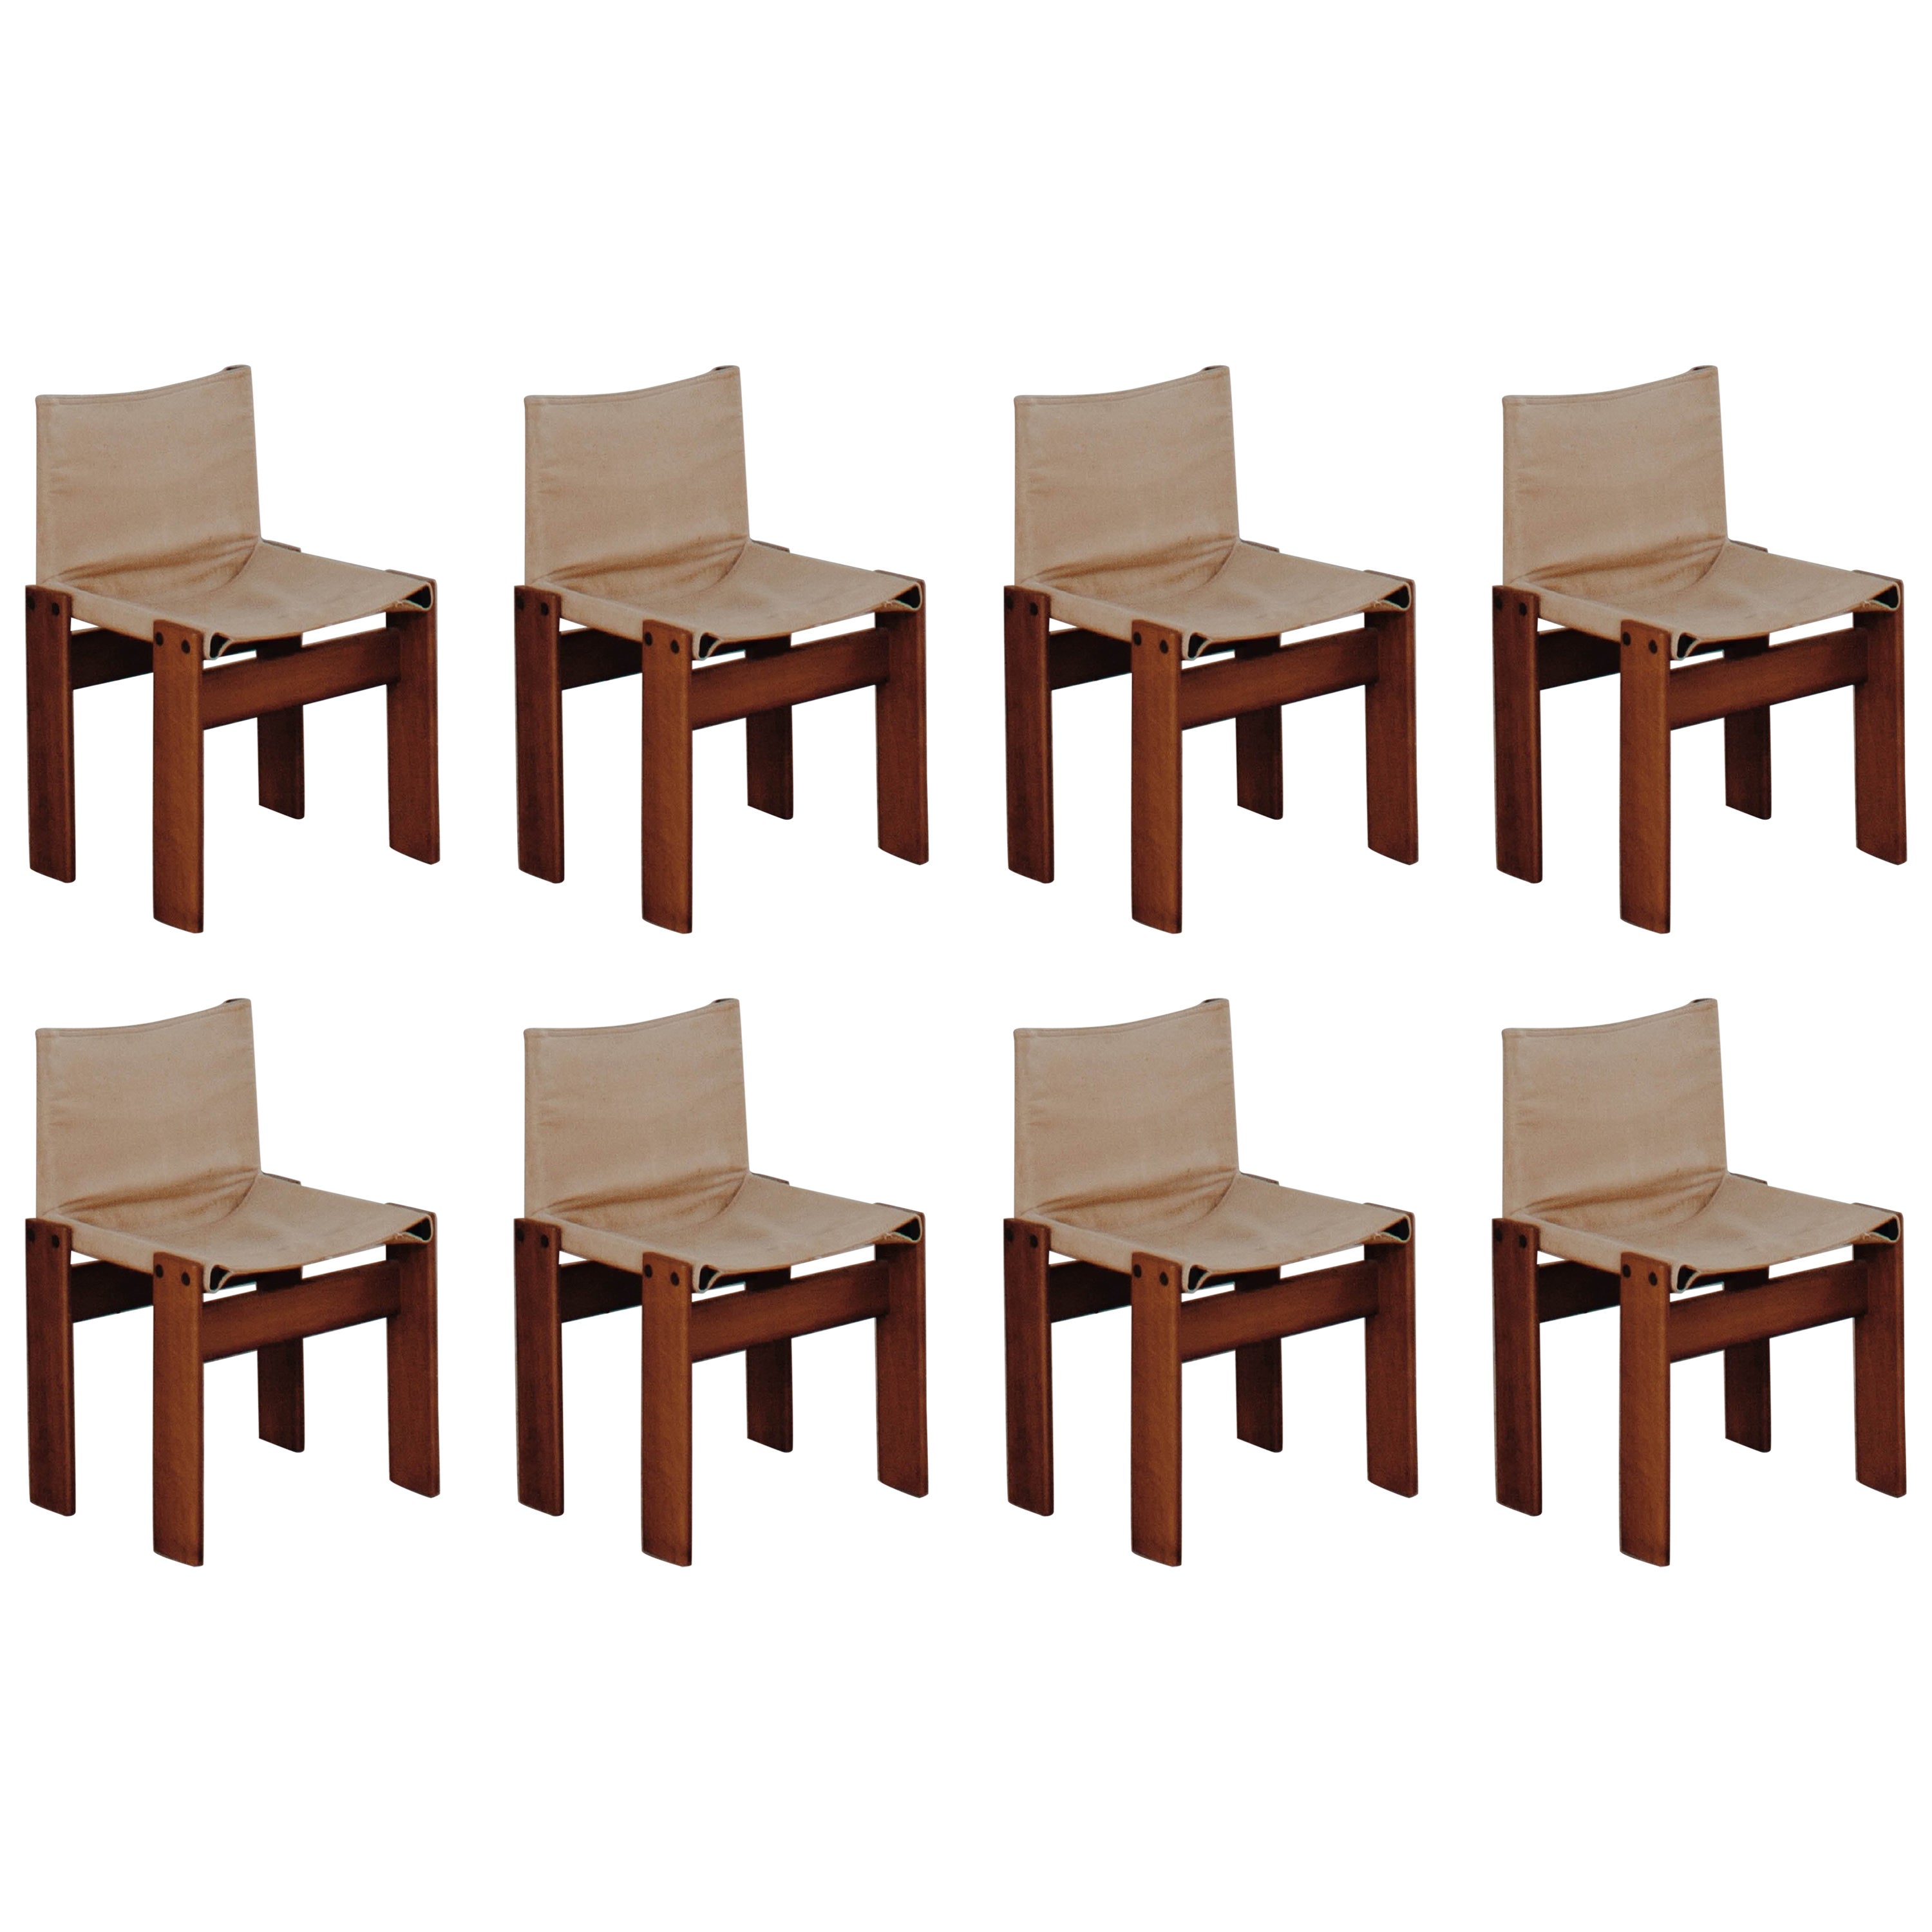 Afra & Tobia Scarpa "Monk" Chairs for Molteni, 1974, Set of 8 For Sale